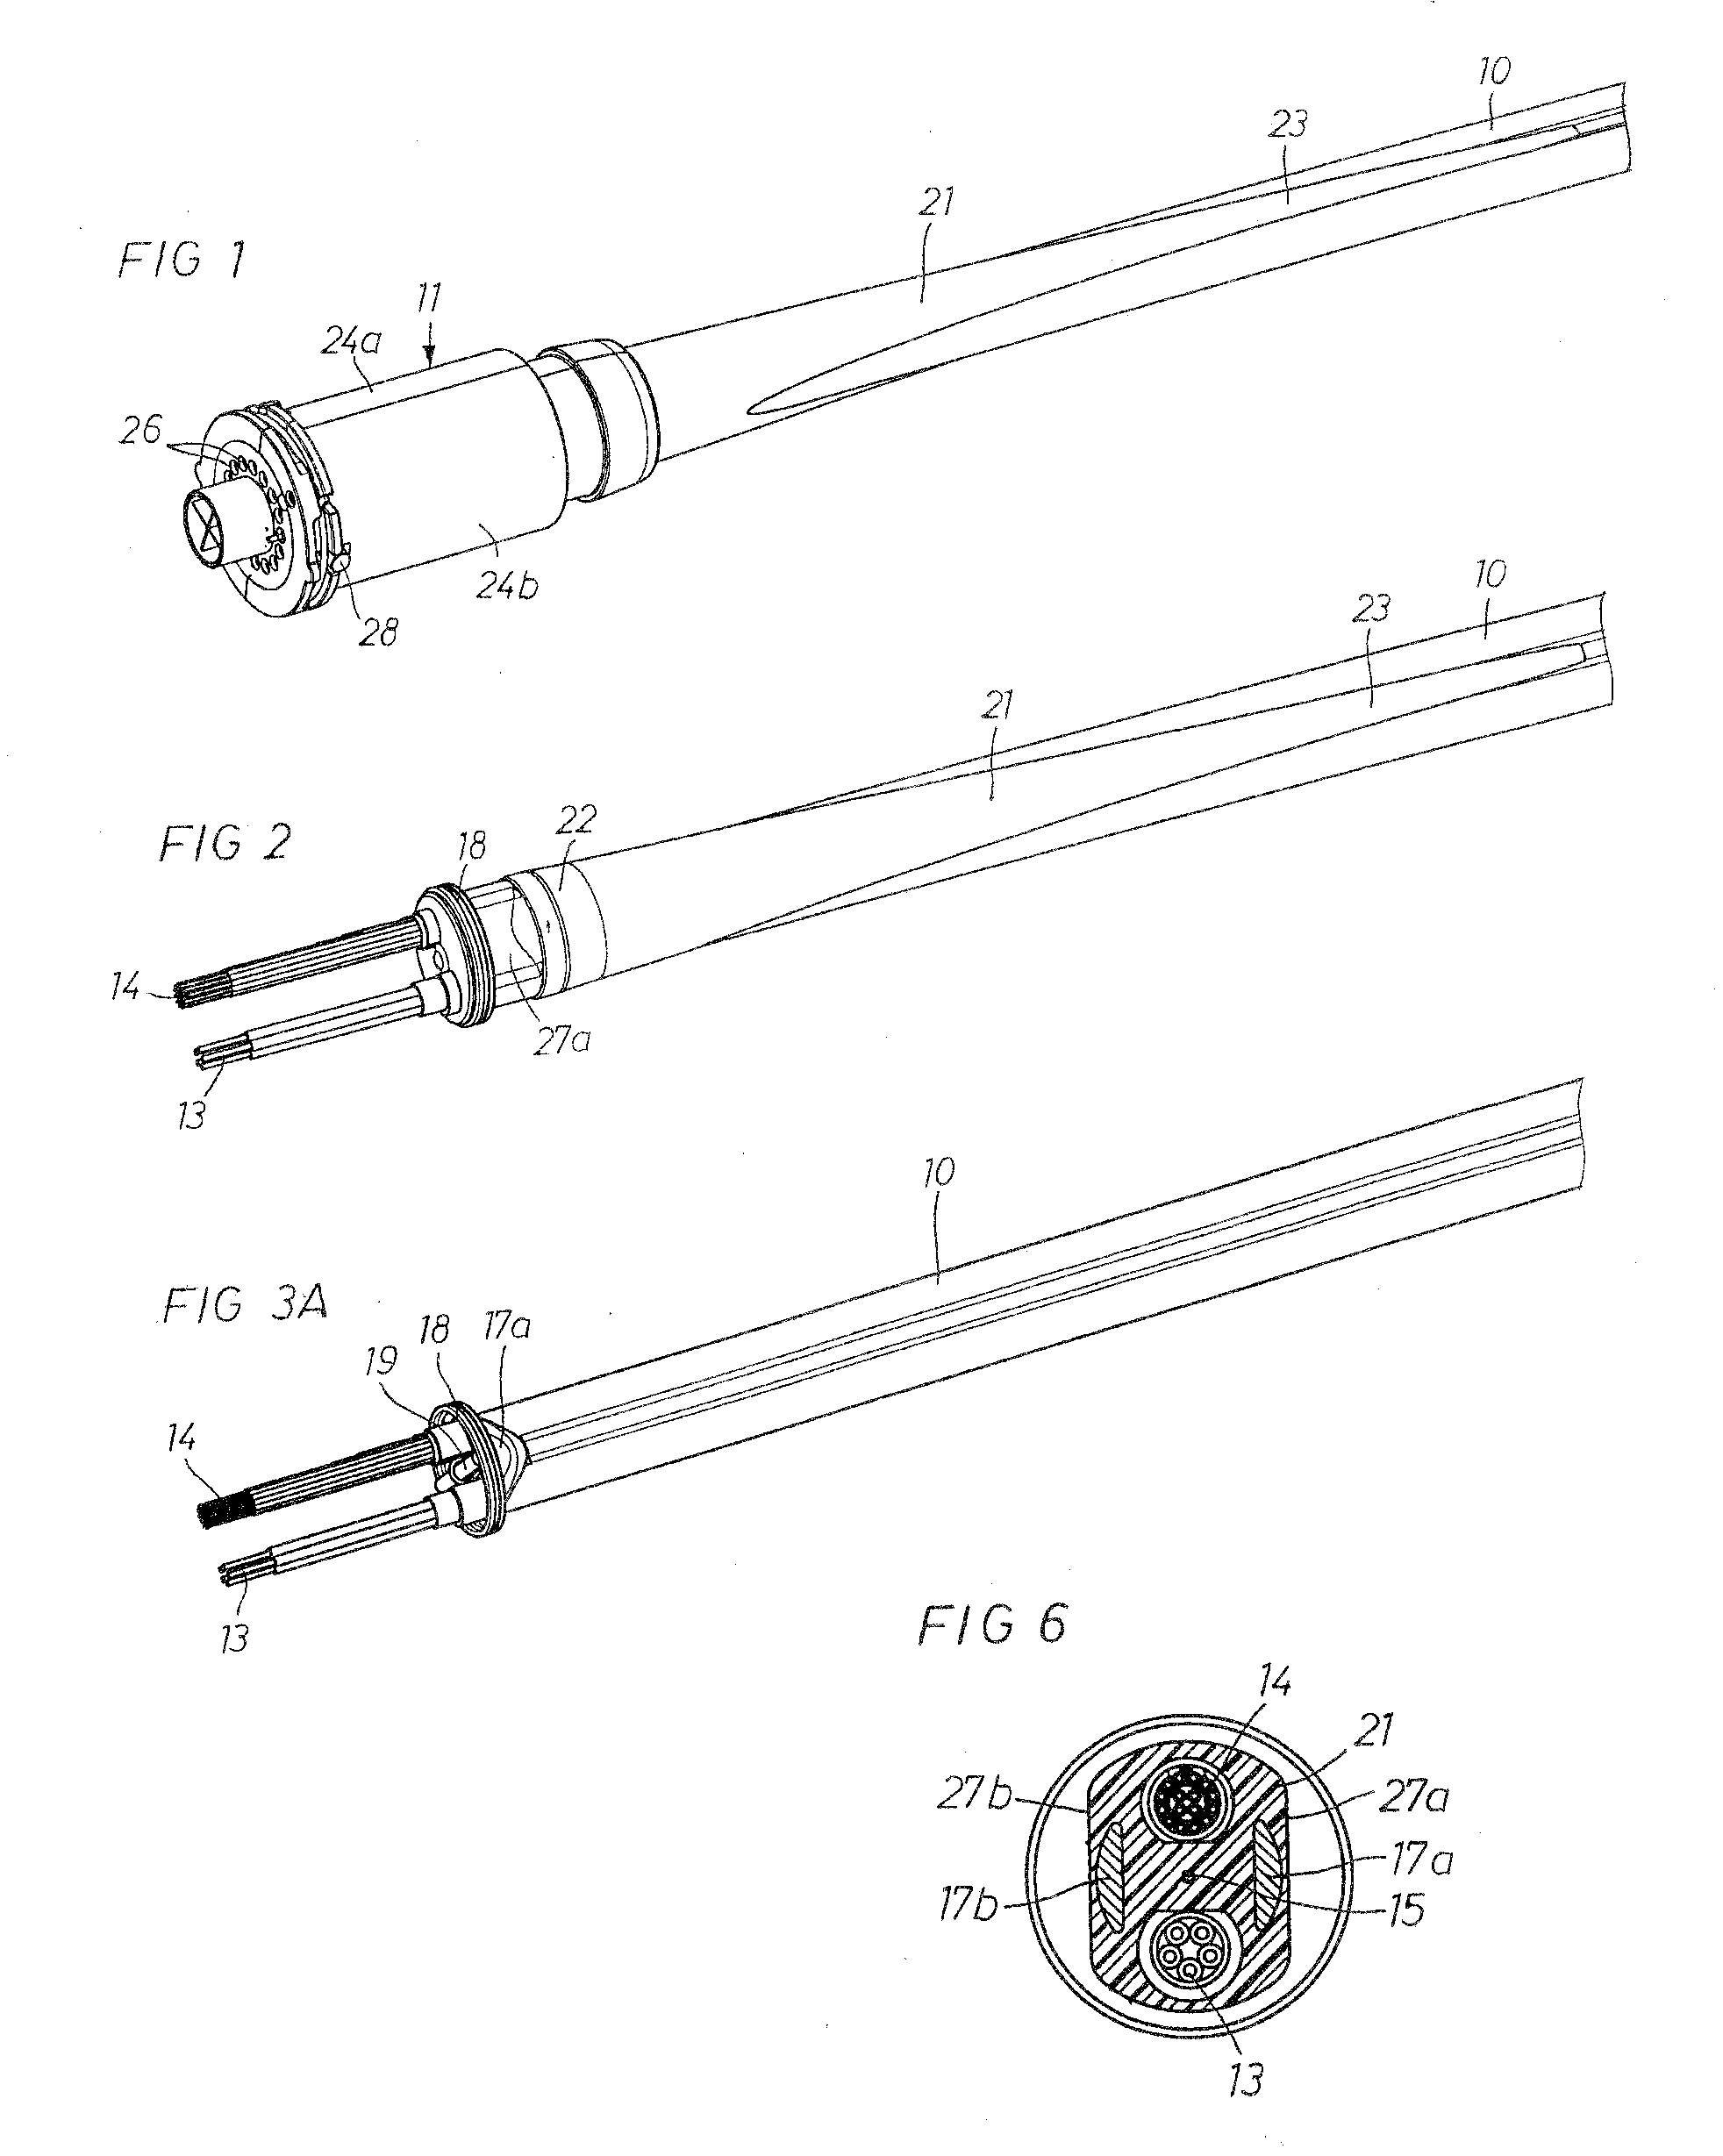 Connector plug for a multi-conductor cable with tension load transferring means